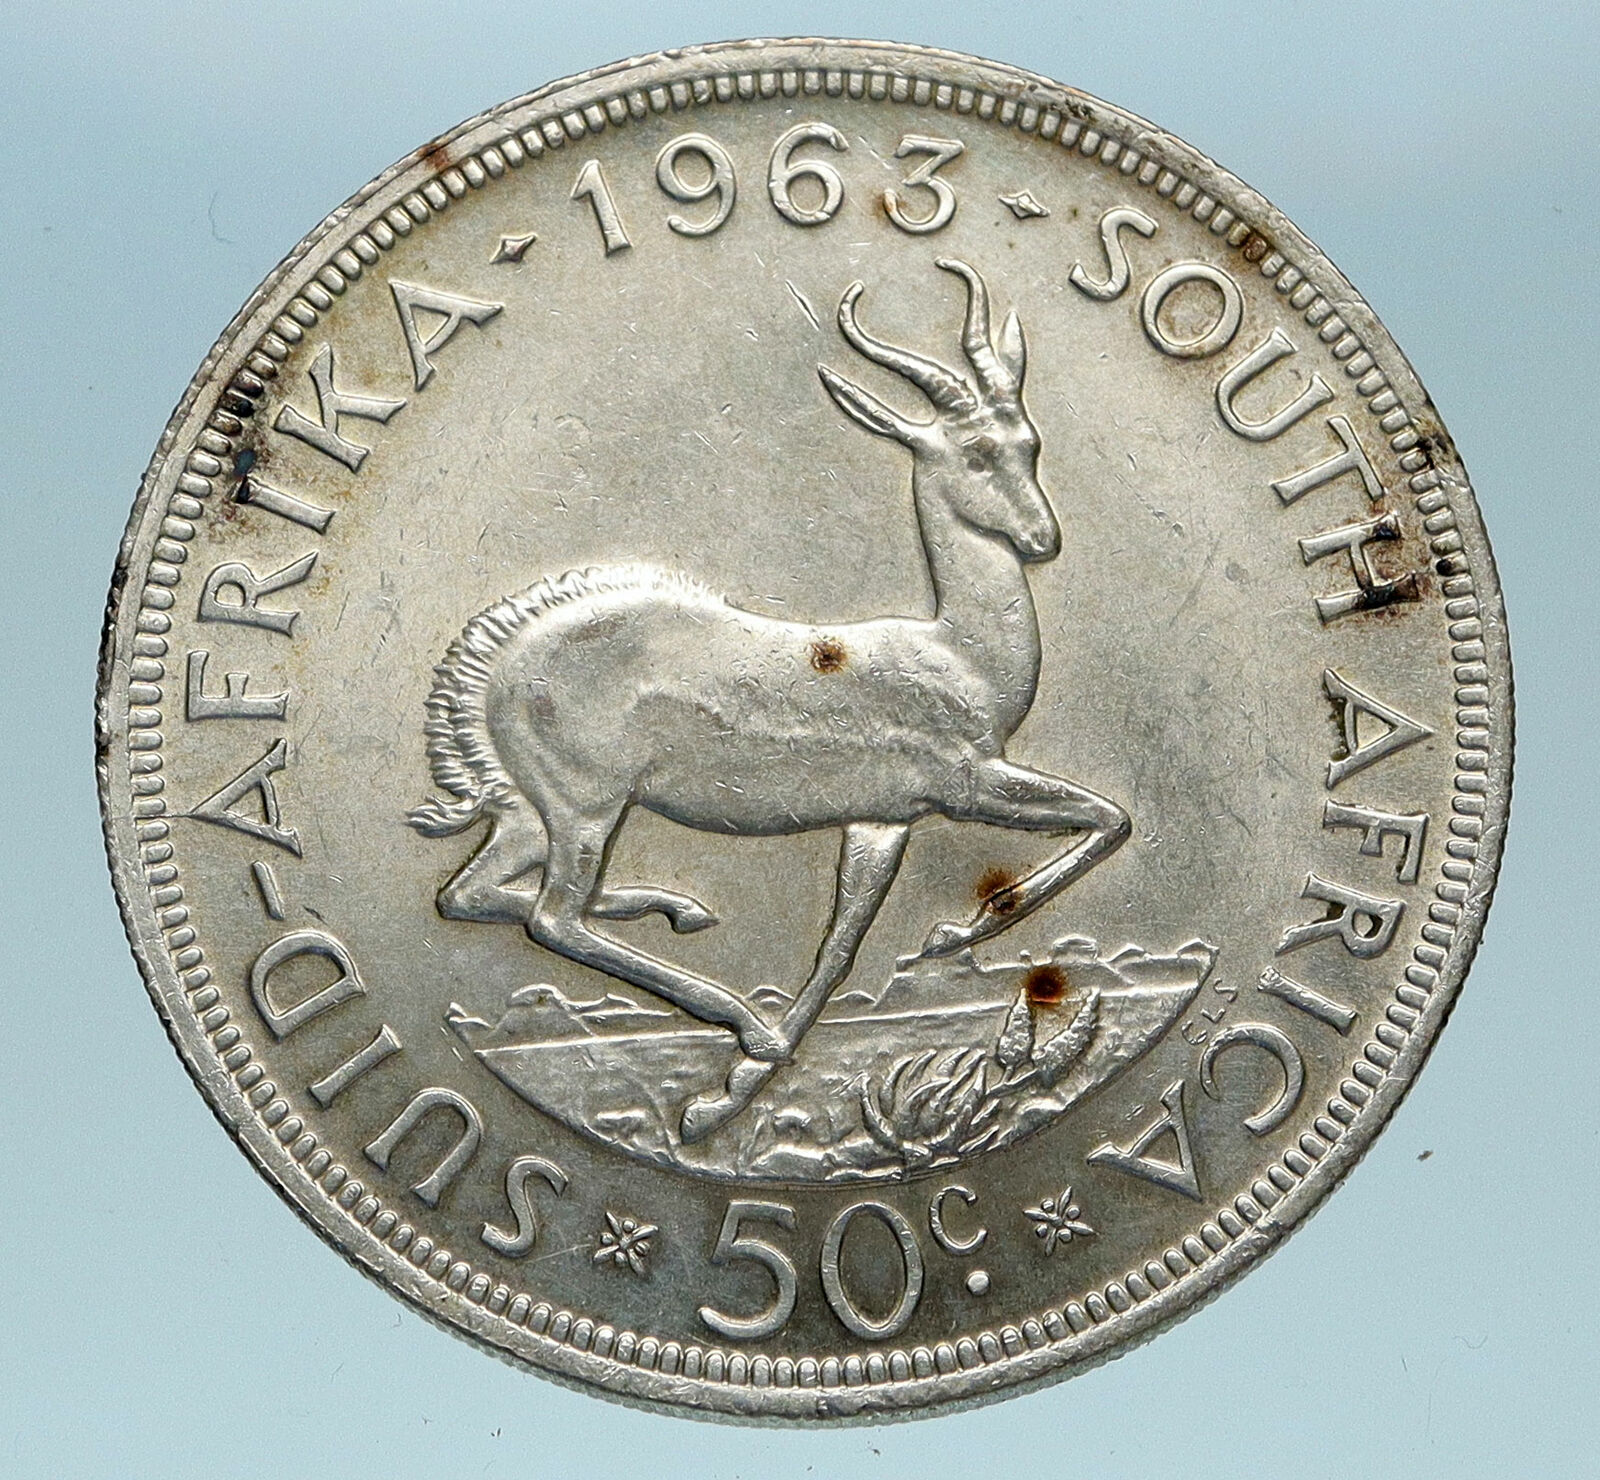 1963 SOUTH AFRICA Founder Jan van Riebeeck Deer OLD Silver 50 Cents Coin i83245